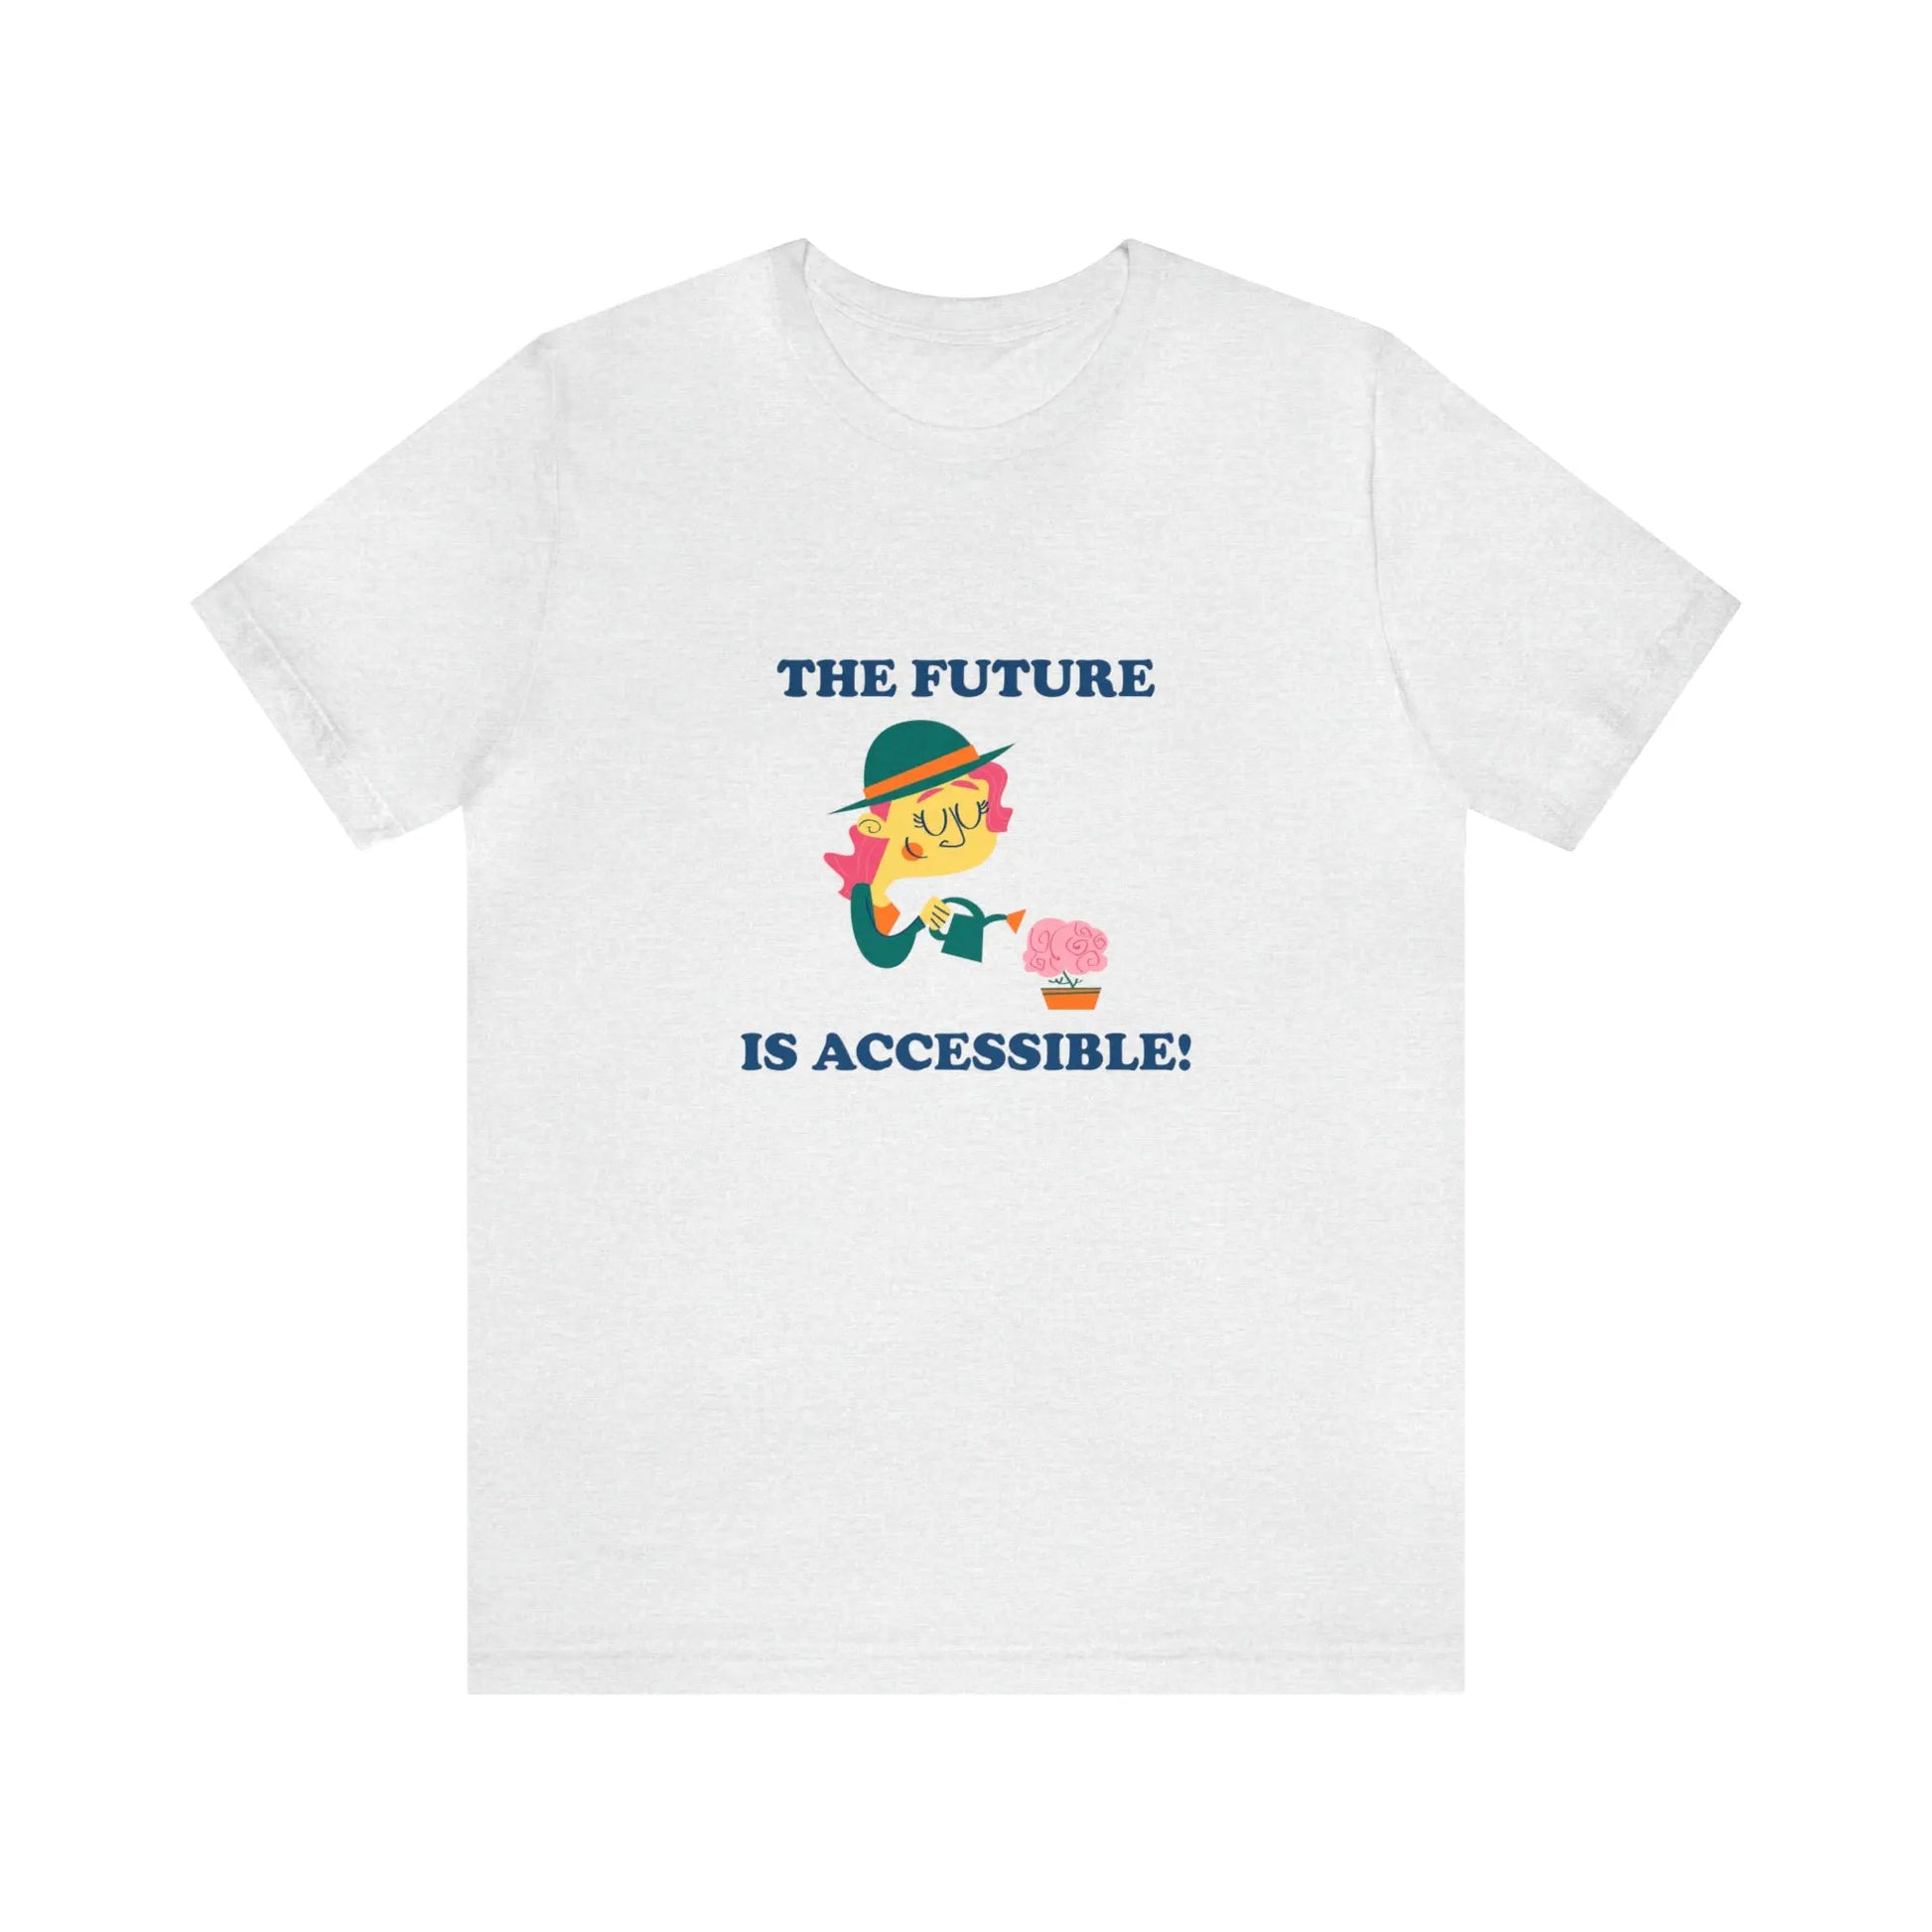 The Future is Accessible T-Shirt